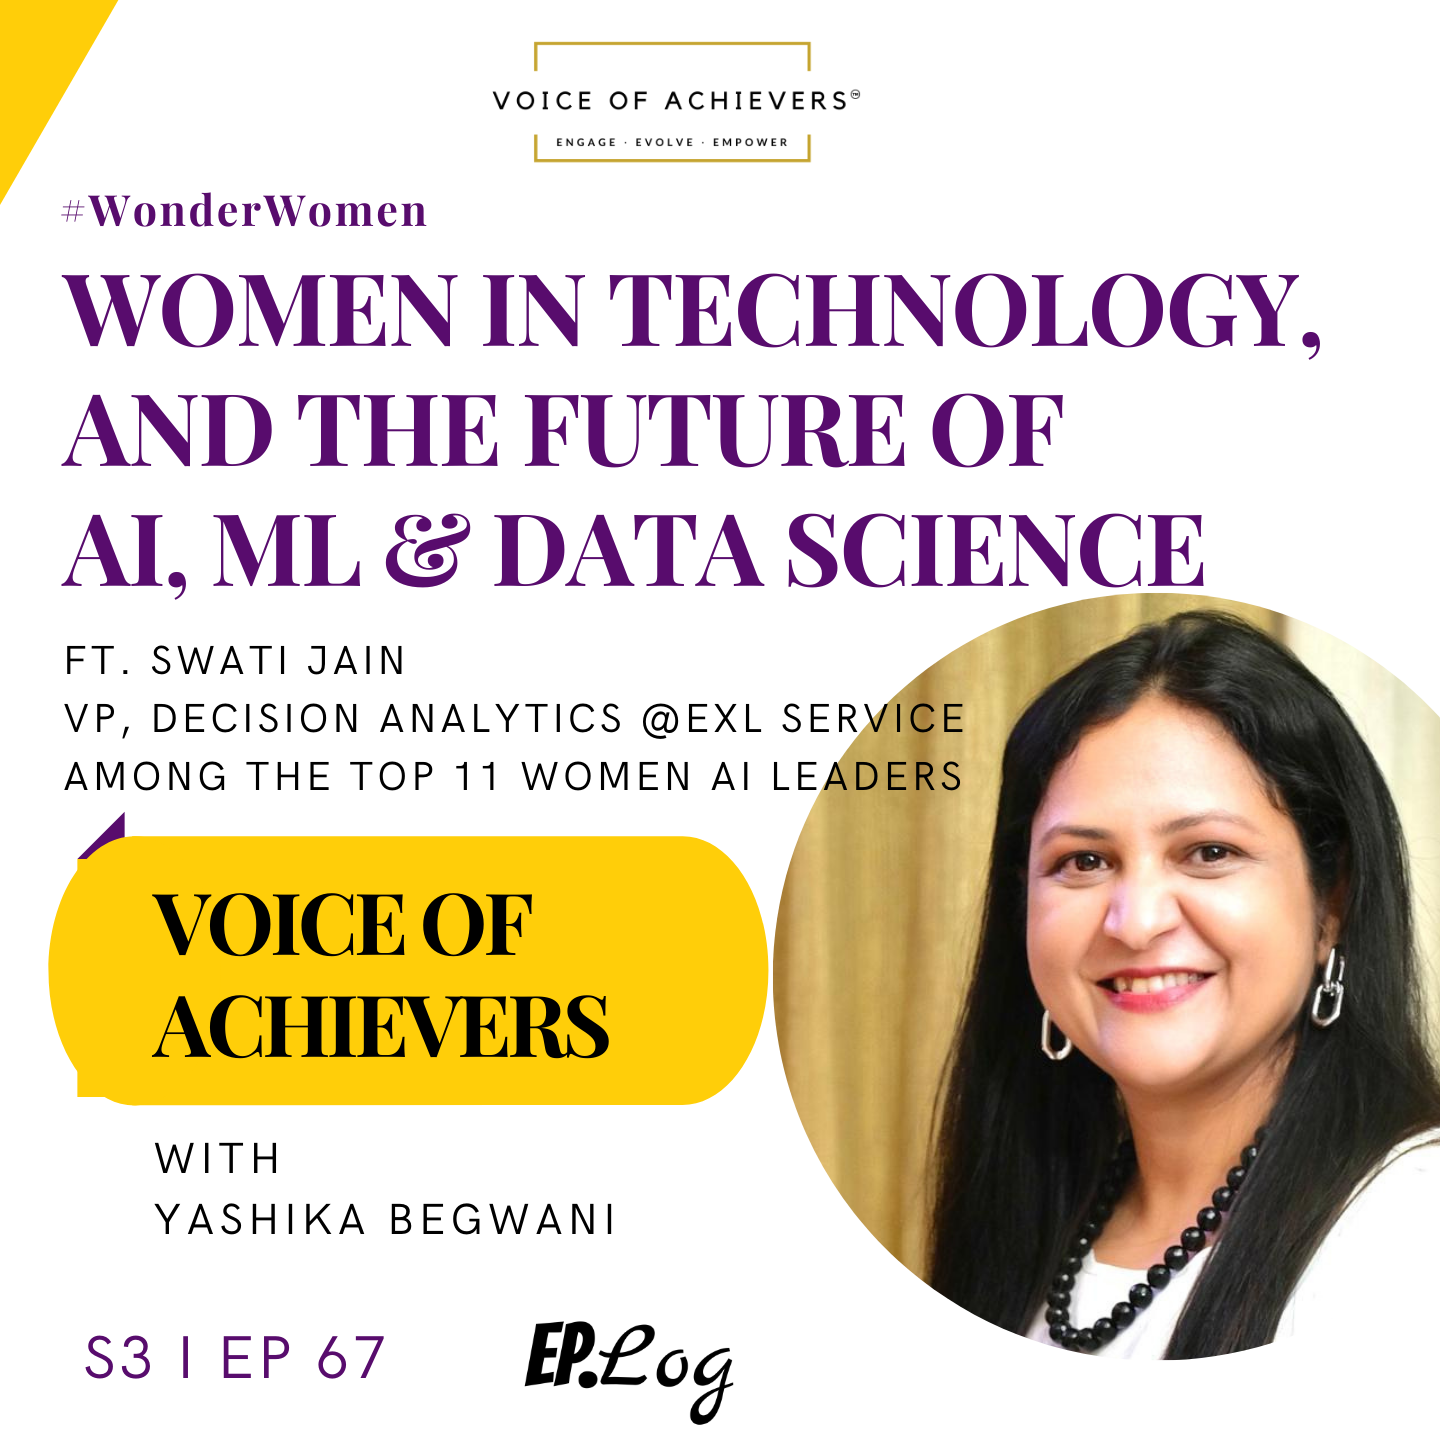 Women in Technology, and the future of AI, ML & Data Science Ft Swati Jain